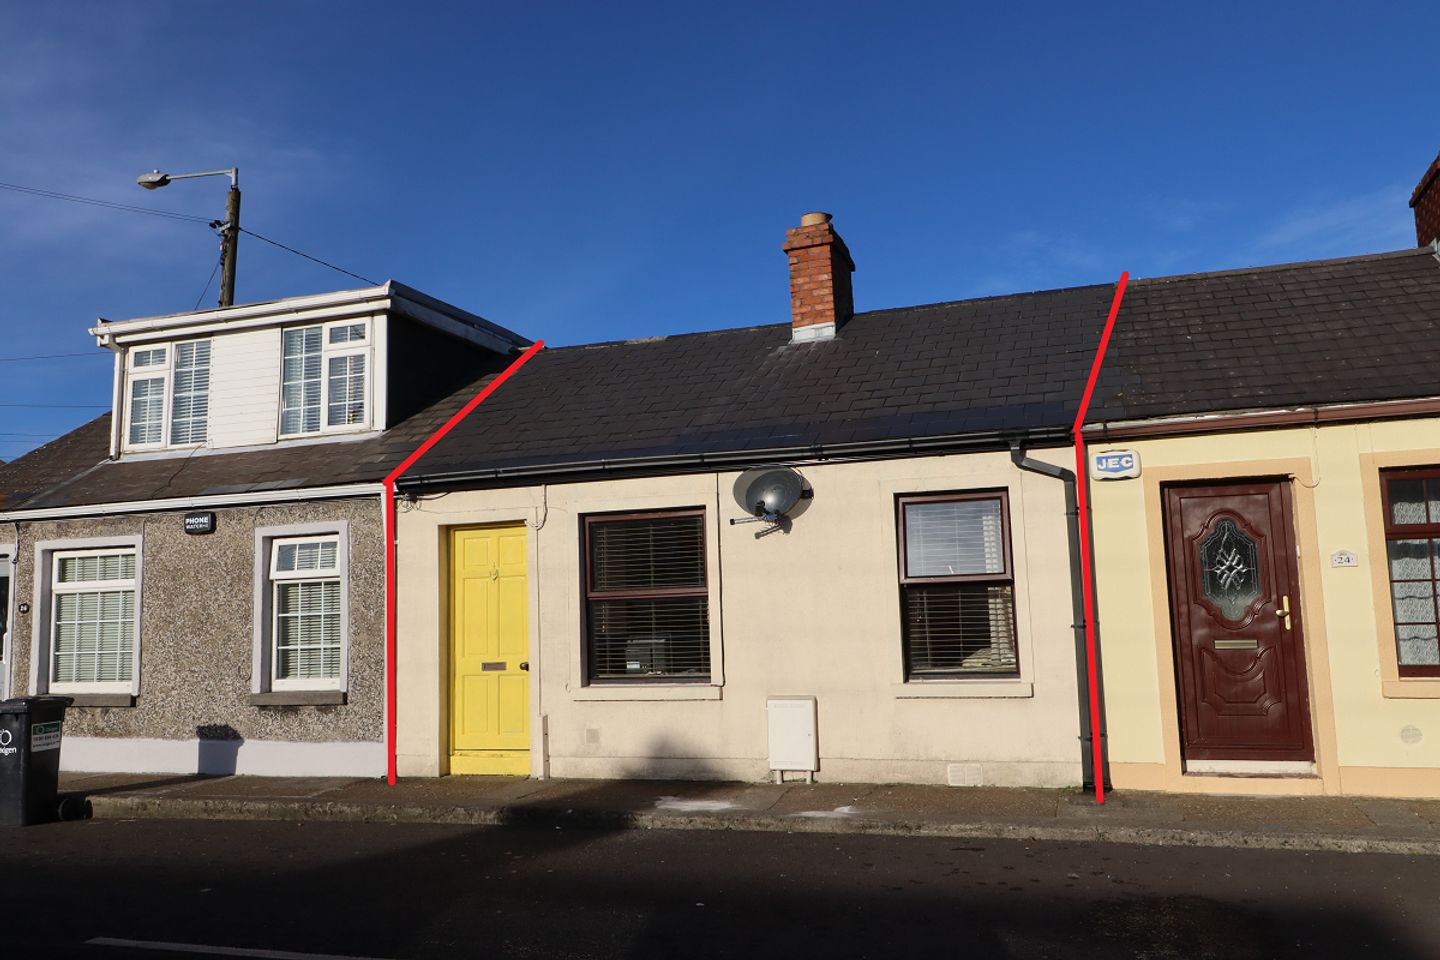 25 Cannon Street, Waterford City, Co. Waterford, X91FYY8